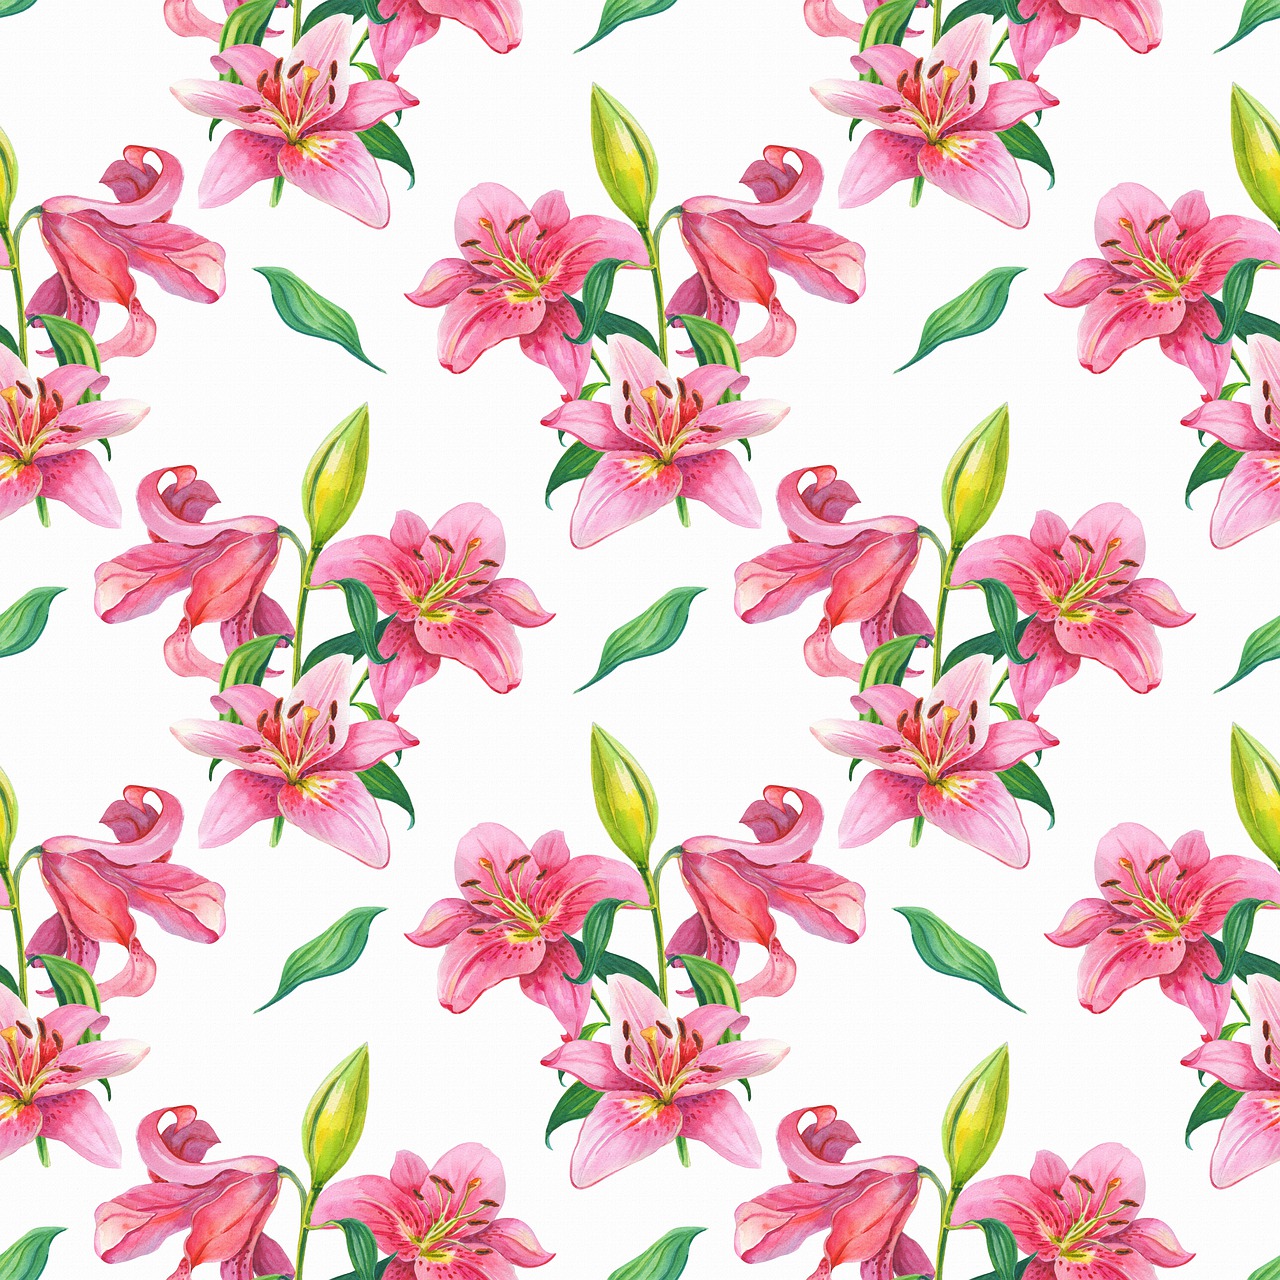 a pattern of pink flowers on a white background, shutterstock, white lilies, listing image, zido, made in adobe illustrator